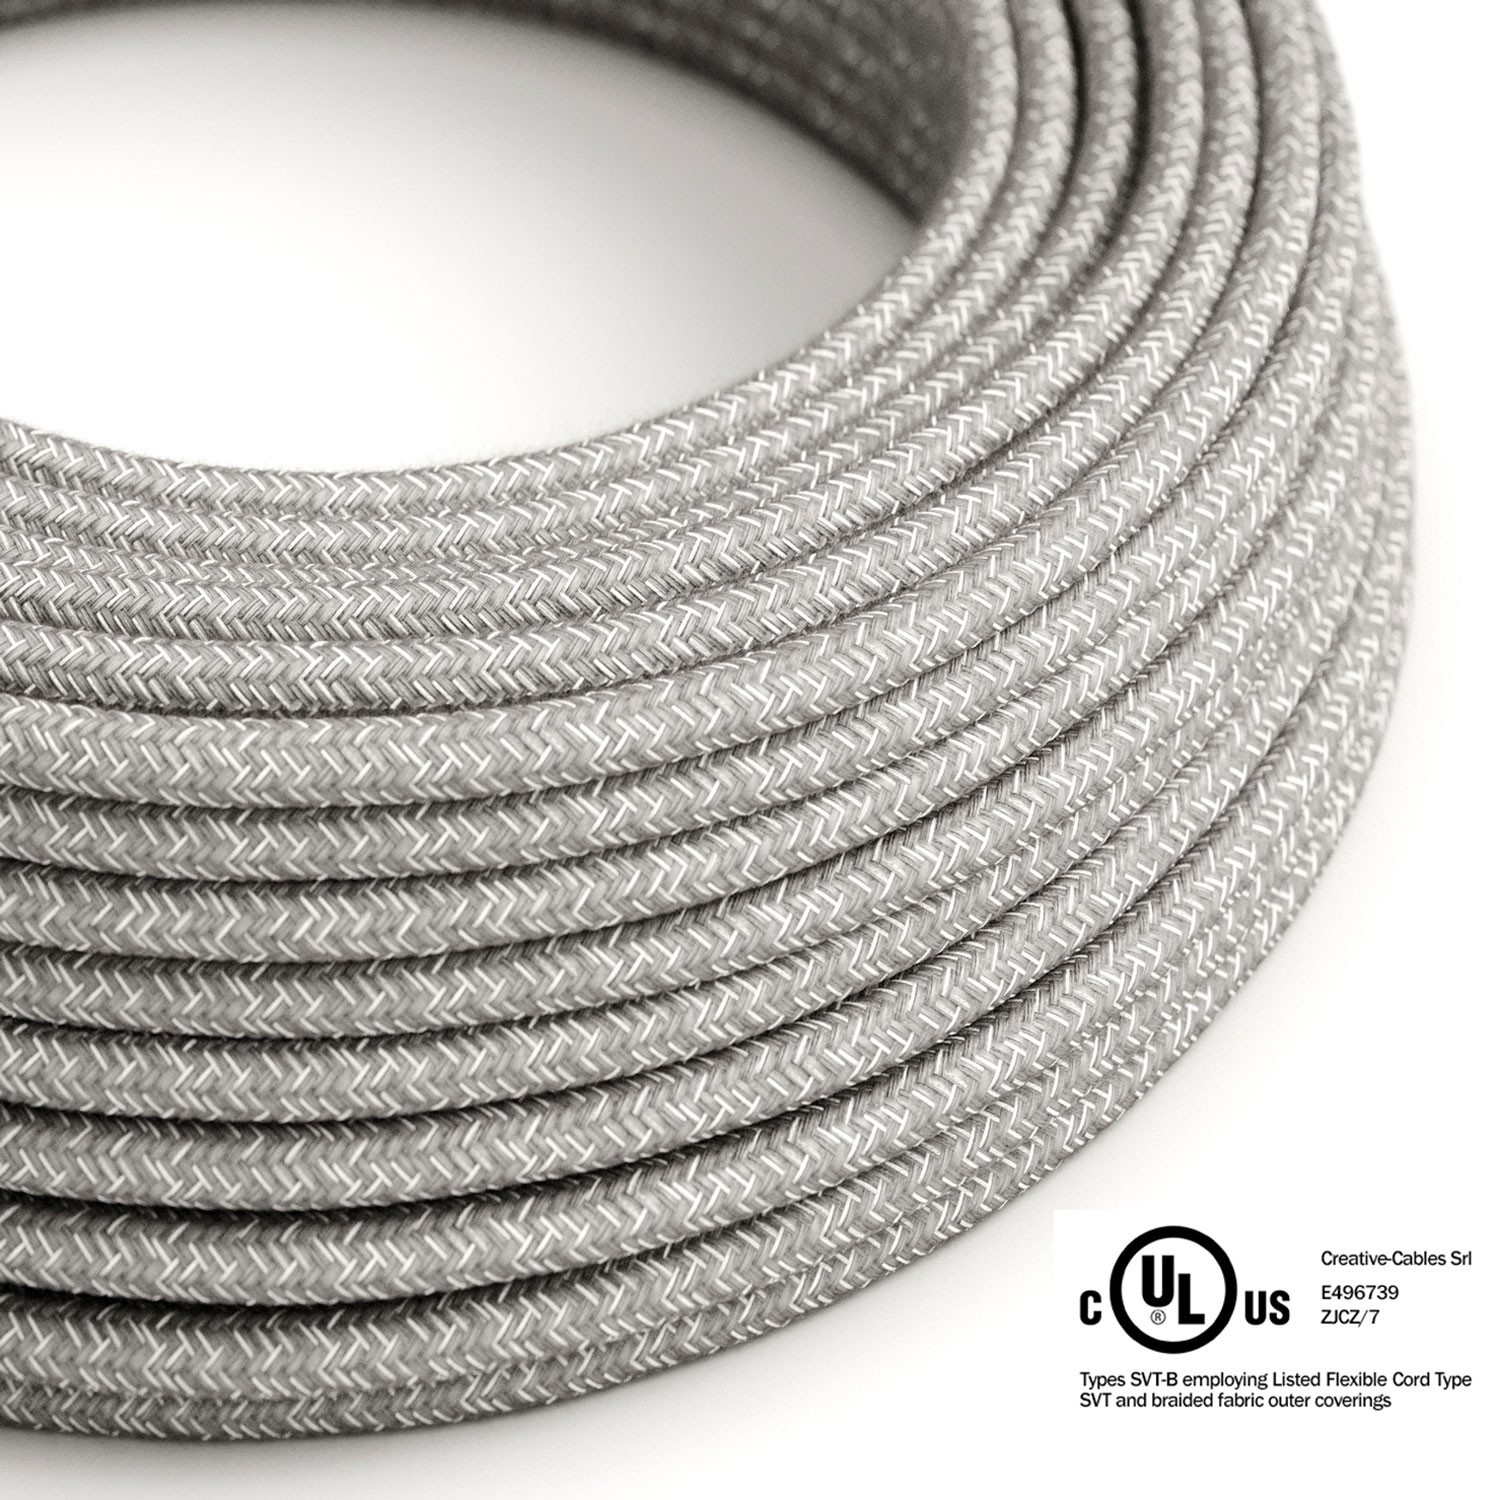 Round Electric Cable 150 ft (45,72 m) coil RN02 Grey Natural Linen - UL listed